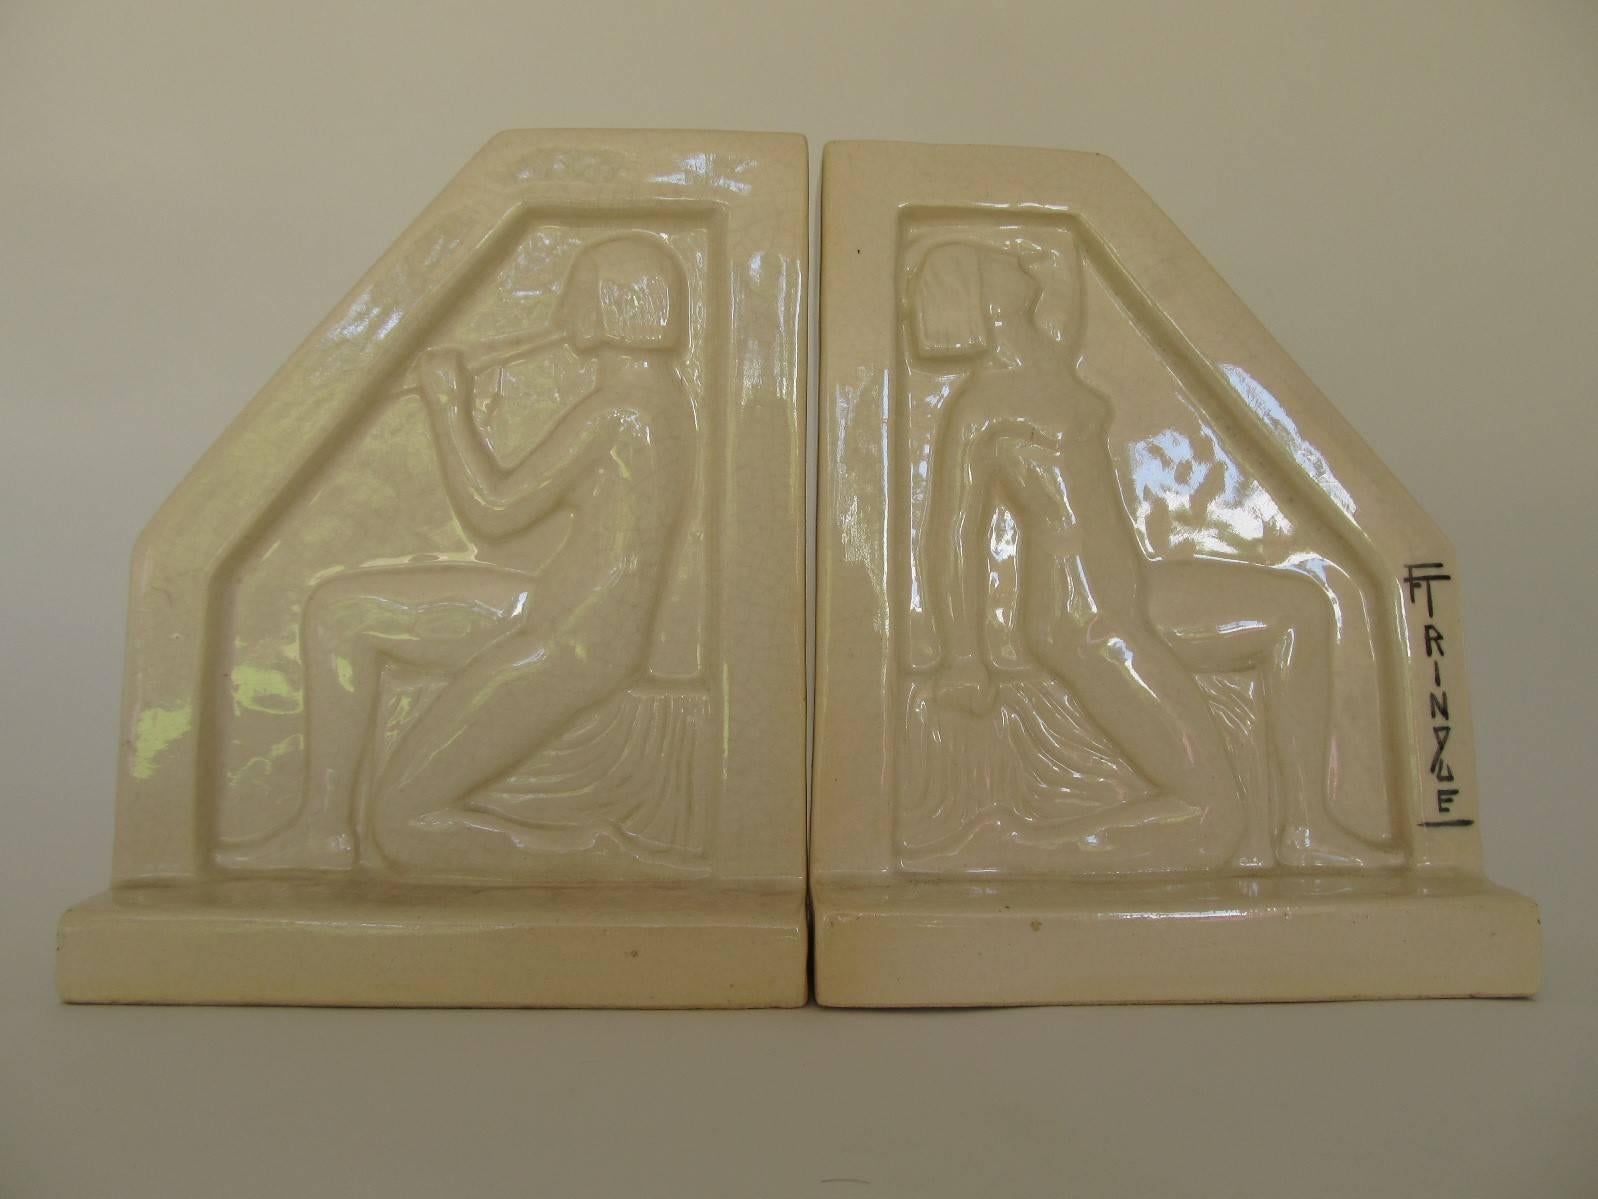 French Art Deco of the 1920s. Architectural forms with bas relief figures on both sides. Each individually signed 